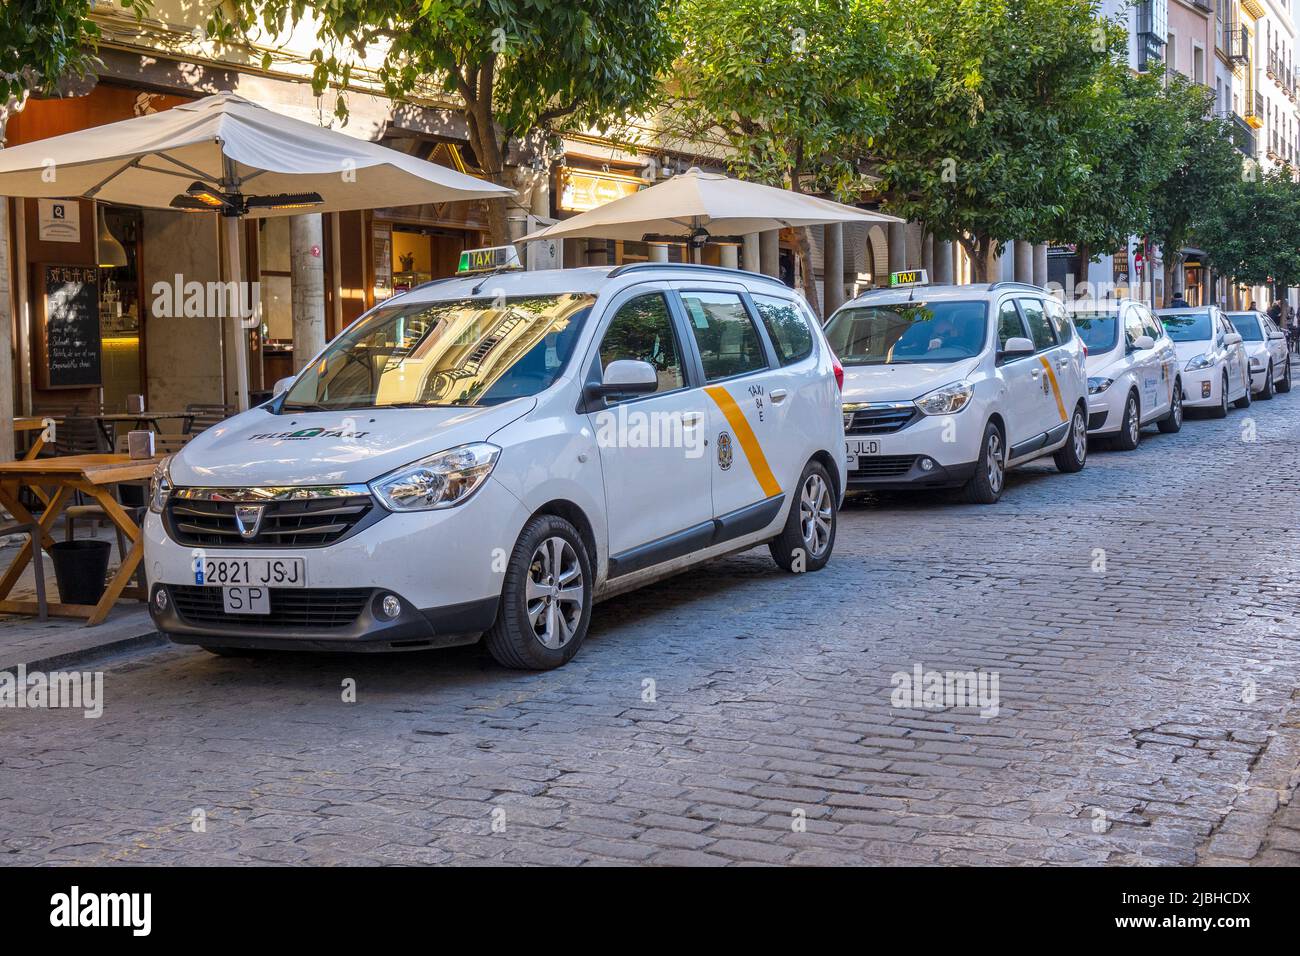 White Taxi Cabs Lined Up On A Street In Seville Spain Tele Taxi Service Dacia Lodgy Minivan taxis Stock Photo